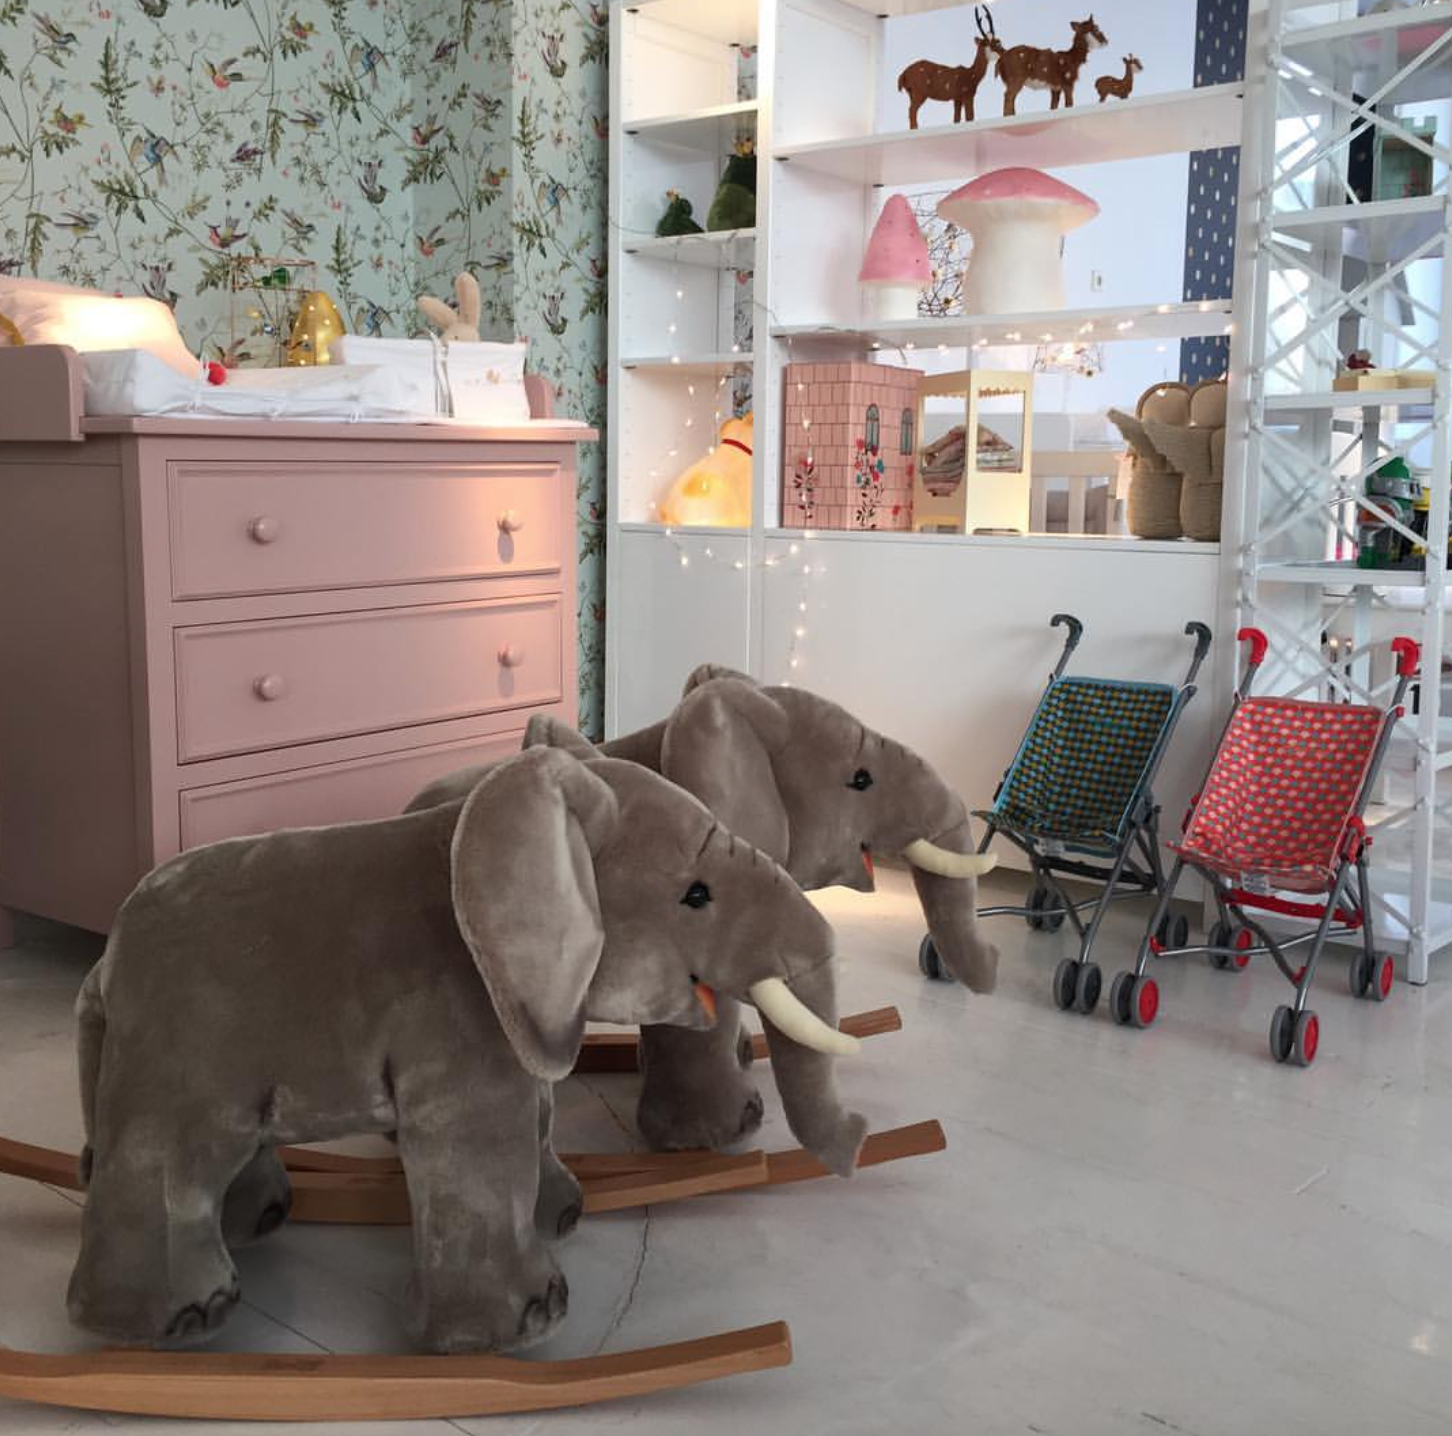 Travelling to Paris with children - Best boutiques for kids - Baudou meubles - High end Nursery decor and furniture